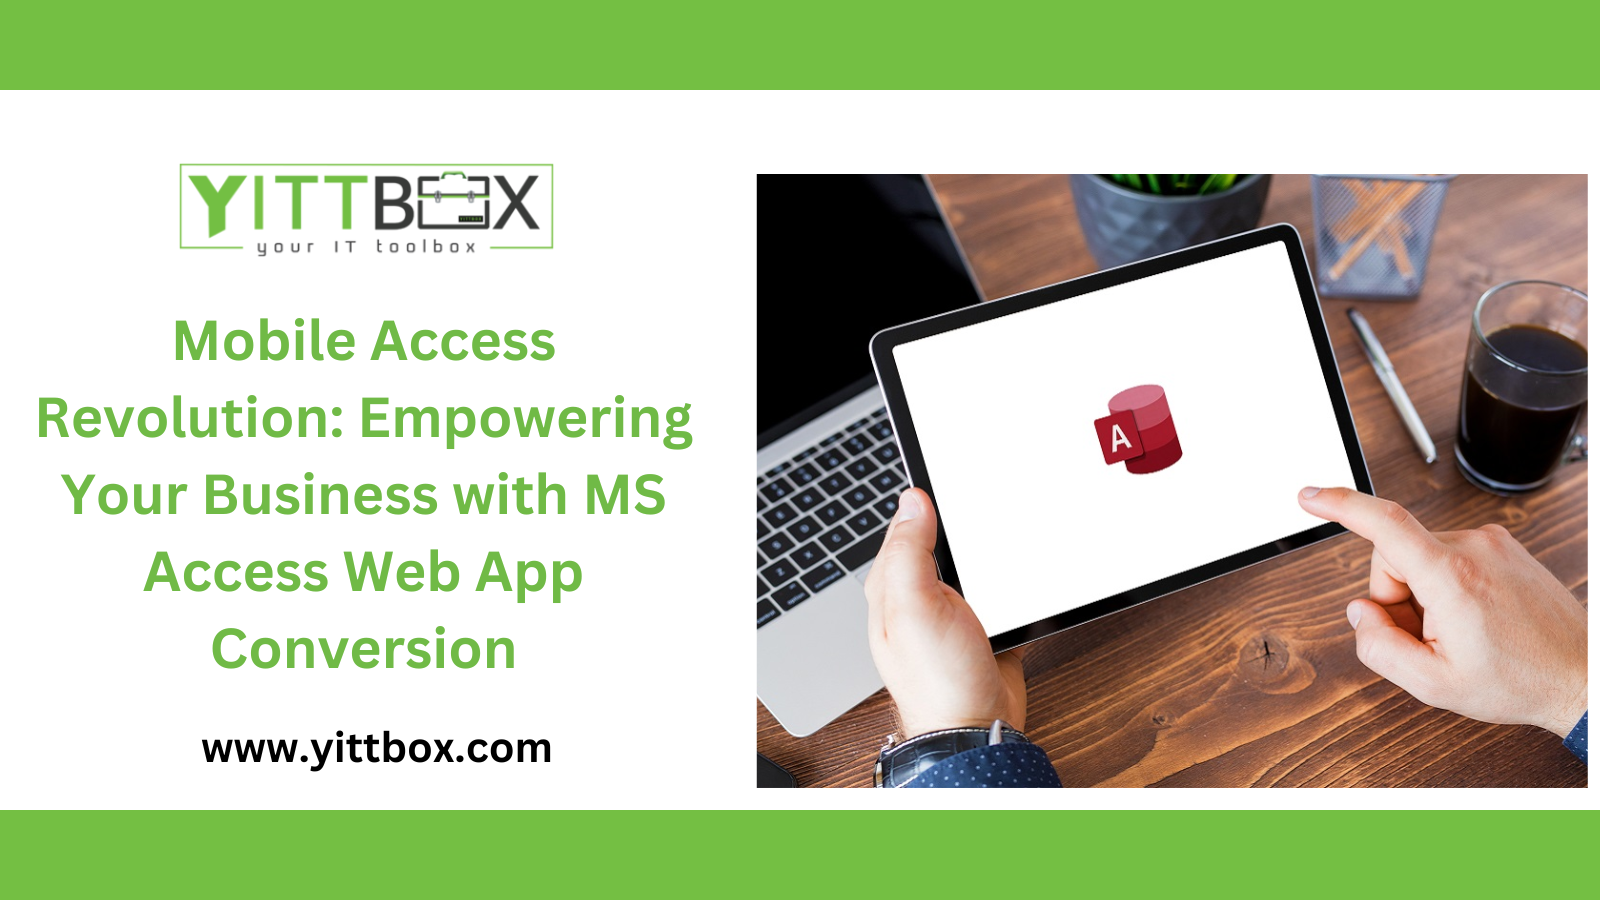 Mobile Access Revolution: Empowering Your Business with MS Access Web App Conversion